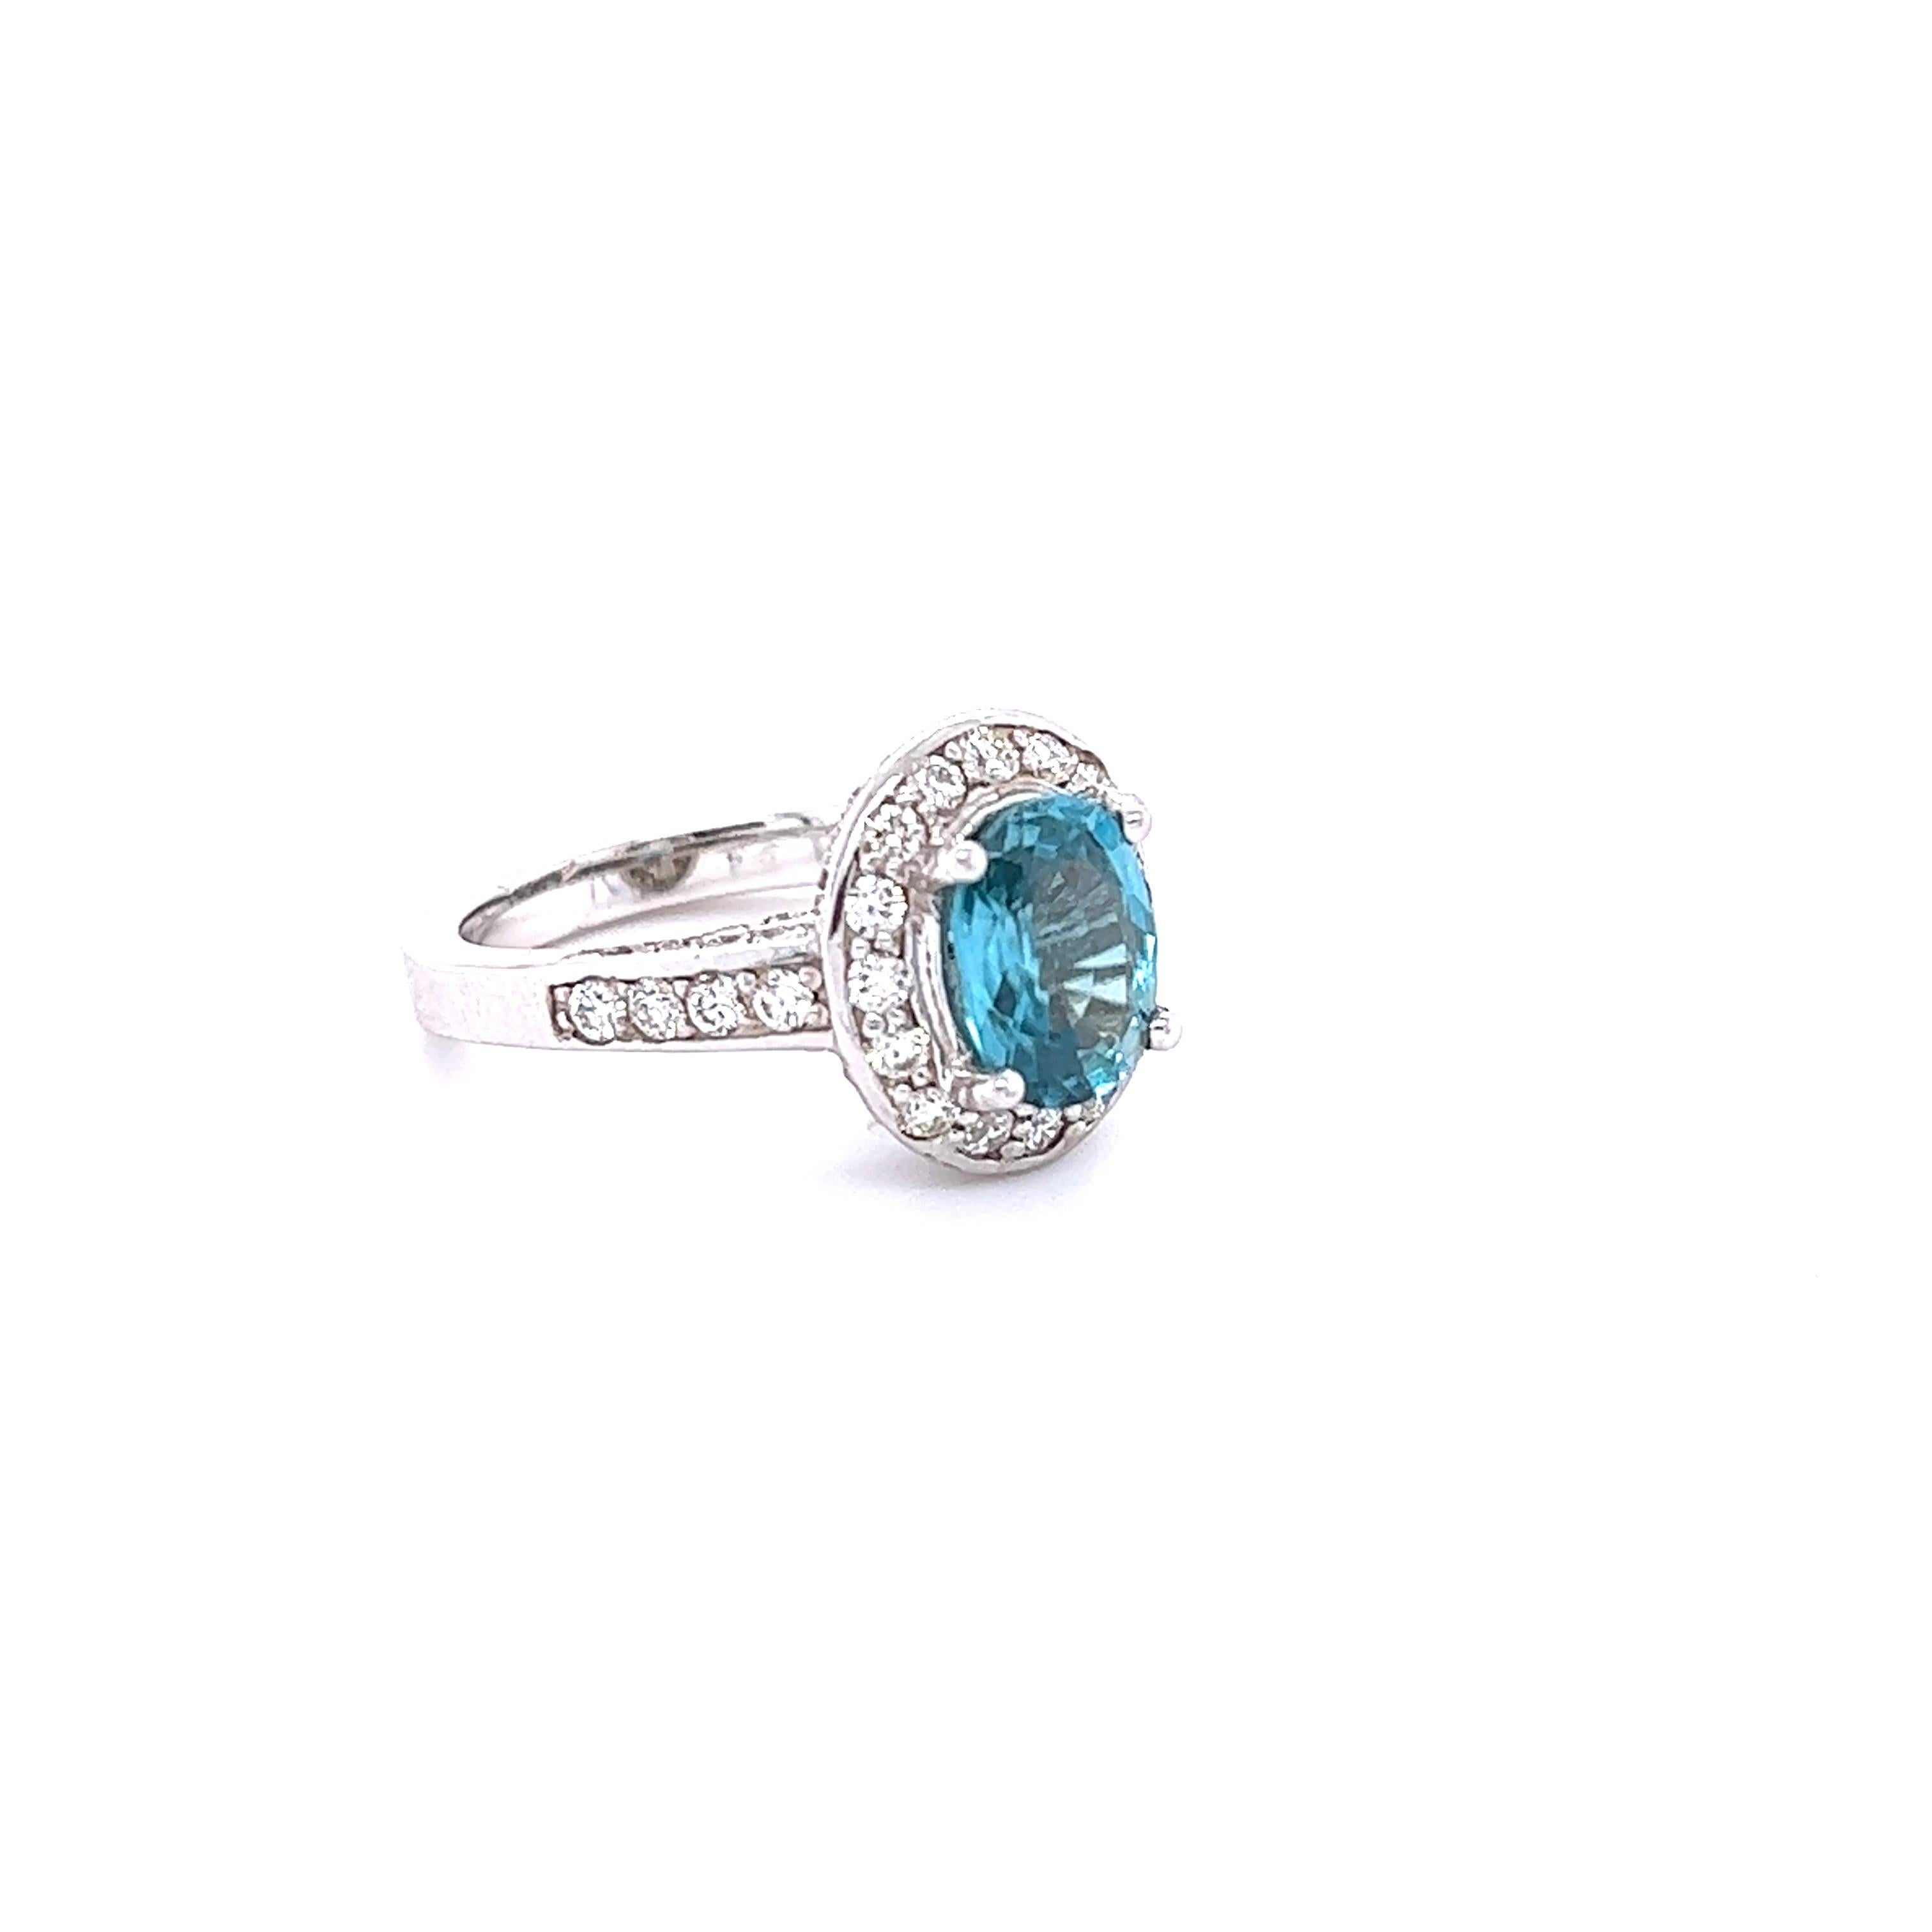 A beautiful Blue Zircon and Diamond ring that can be a nice Engagement ring or just an everyday ring!
Blue Zircon is a natural stone mined mainly in Sri Lanka, Myanmar, and Australia.  
This ring has a Oval Cut Blue Zircon that weighs 2.98 carats